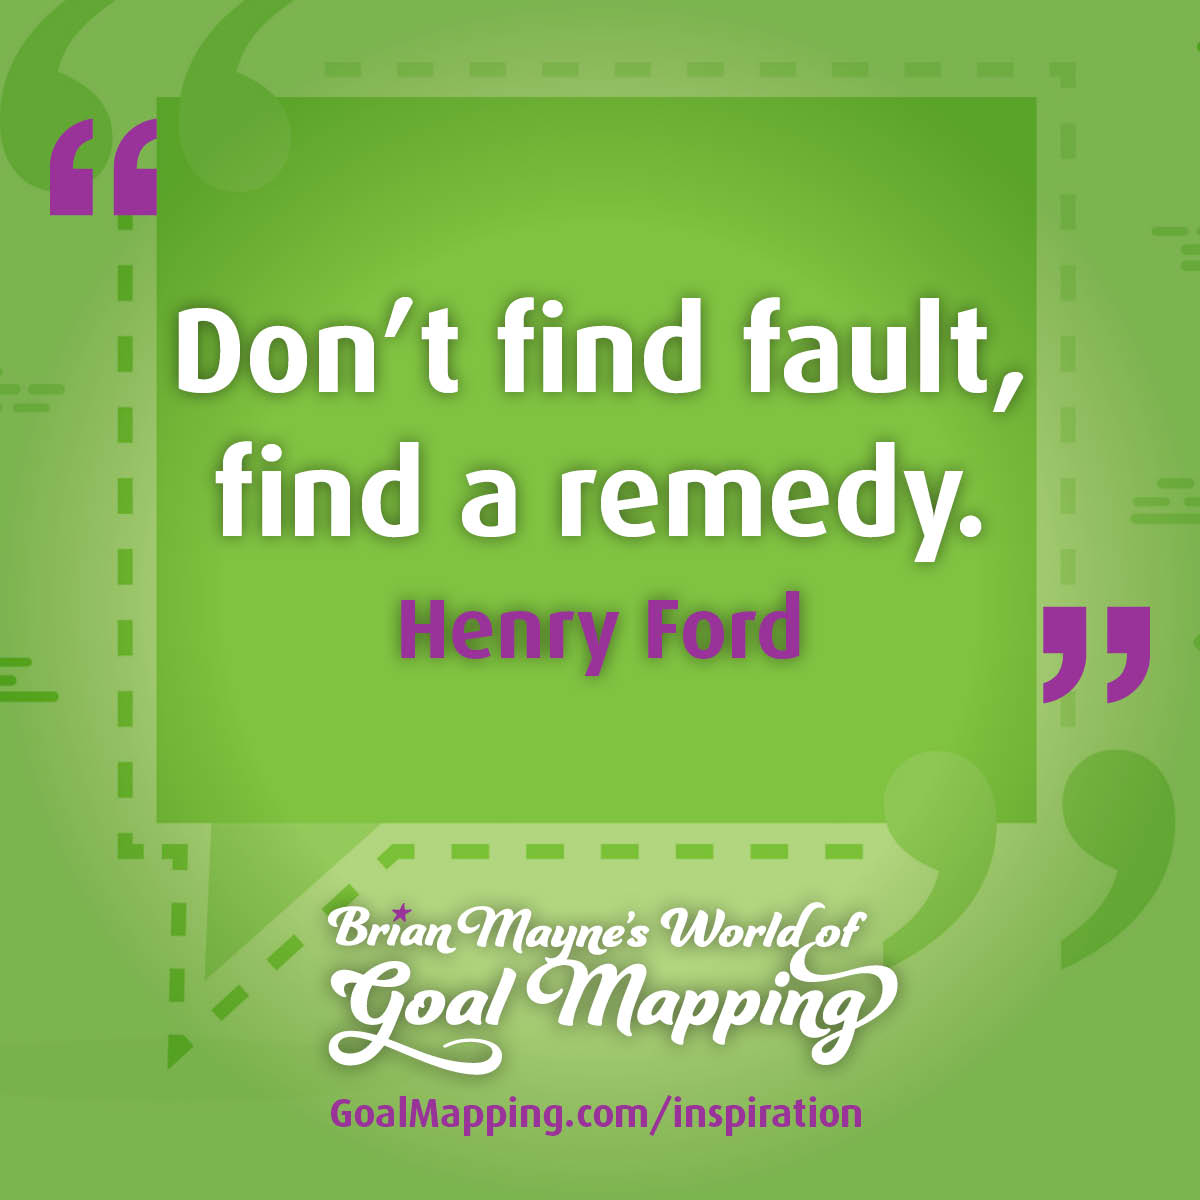 "Don’t find fault, find a remedy." Henry Ford